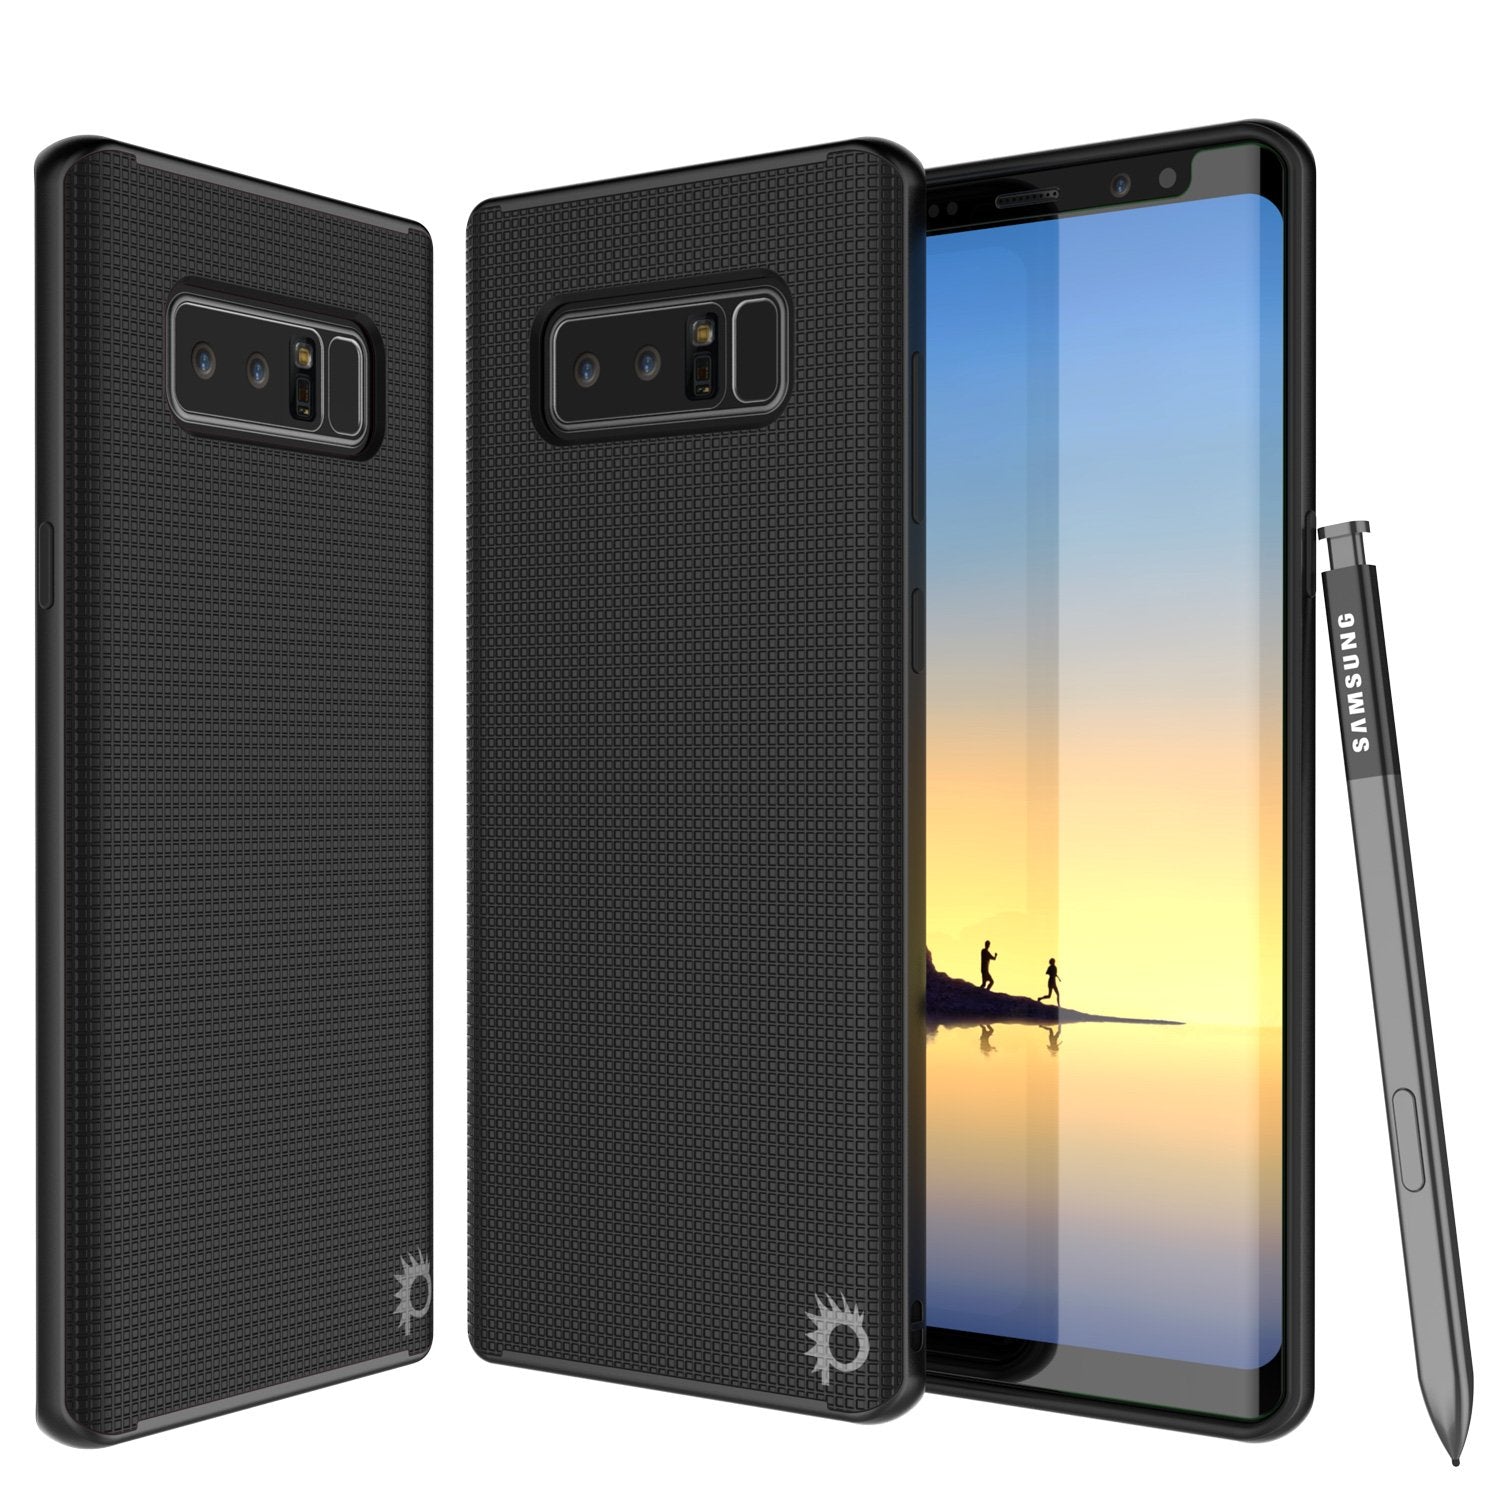 Galaxy Note 8 Screen/Shock Protective Dual Layer Case [Black]